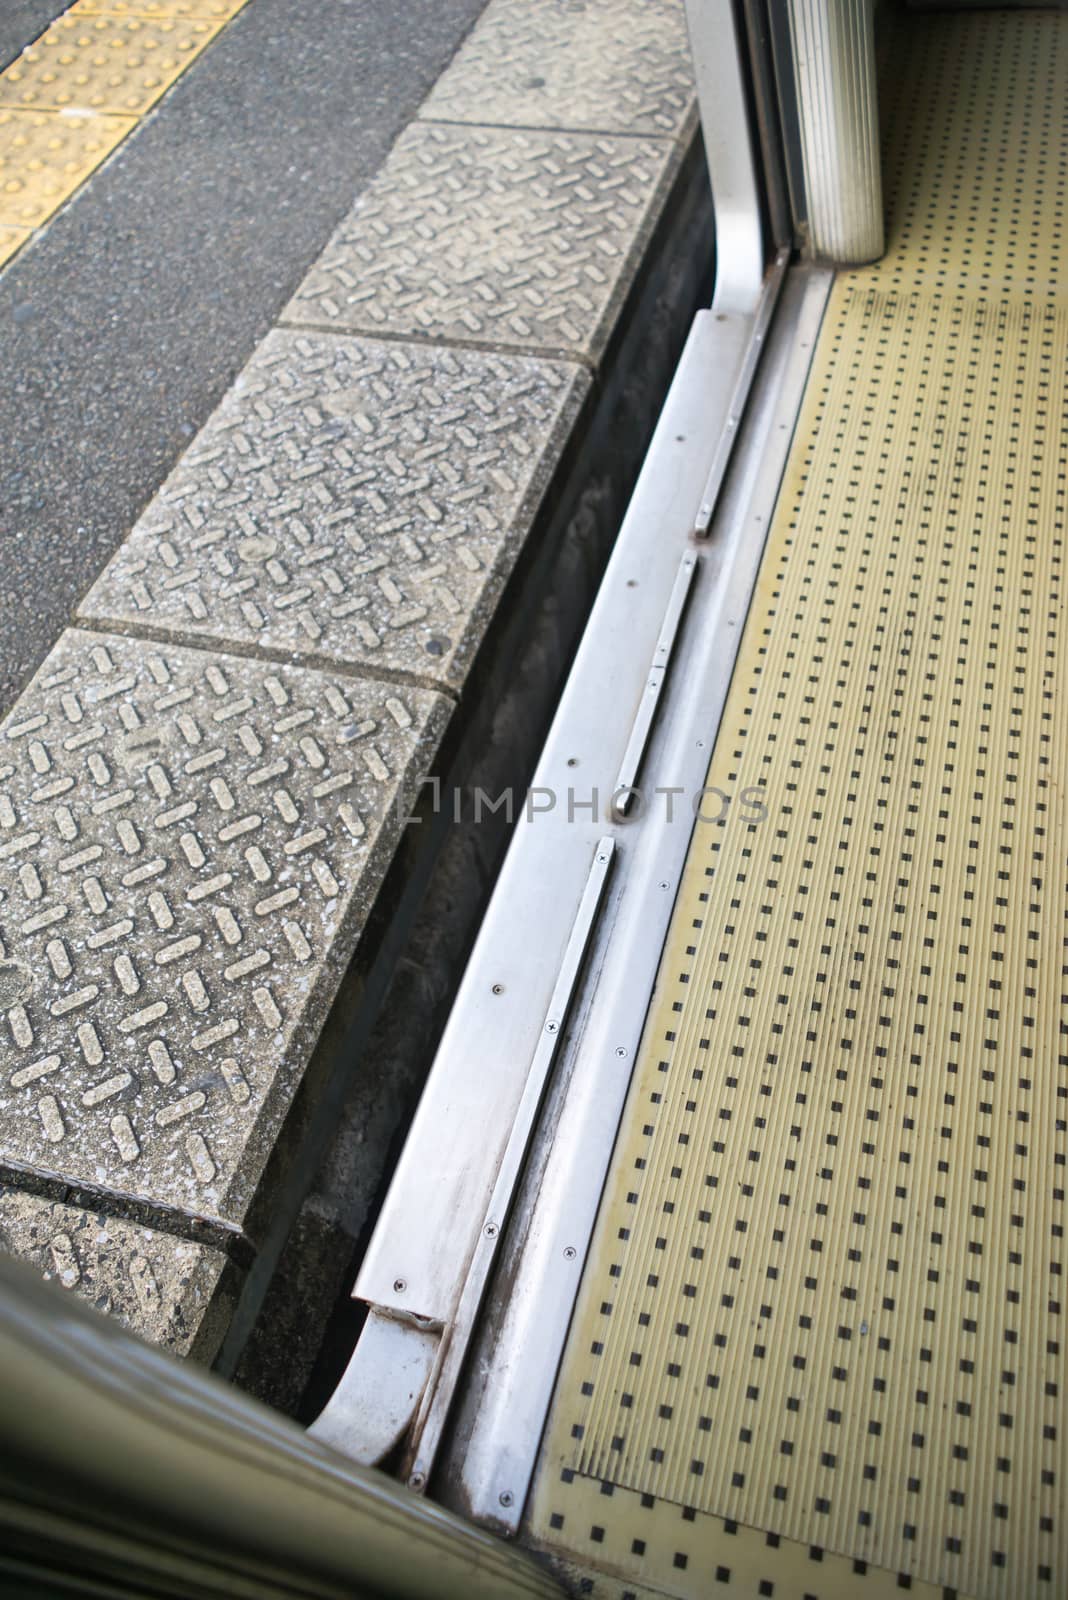 The distance gap between the train and platform